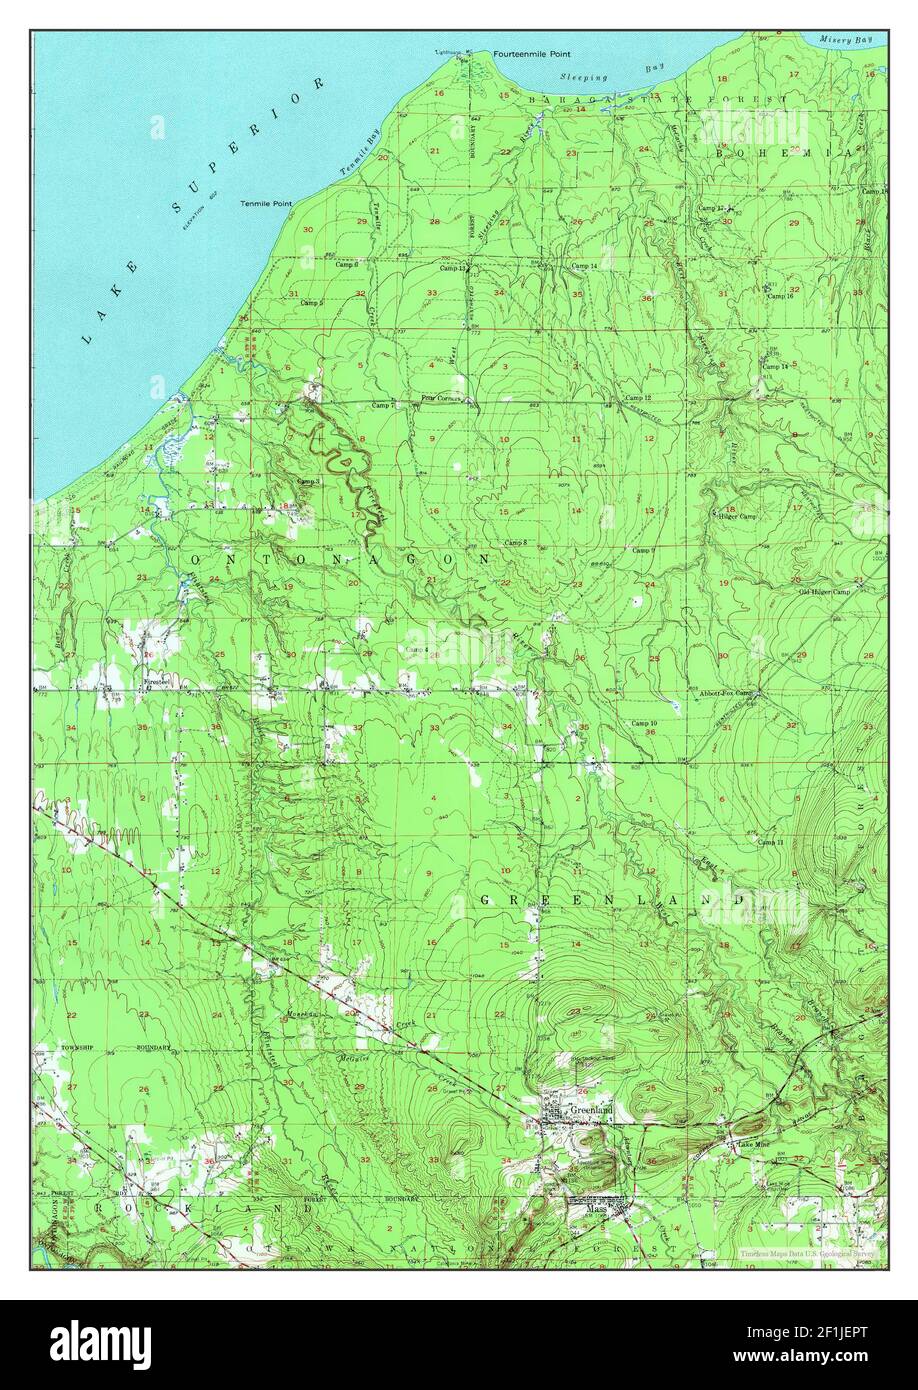 Greenland Michigan Map 1950 162500 United States Of America By Timeless Maps Data Us Geological Survey 2F1JEPT 